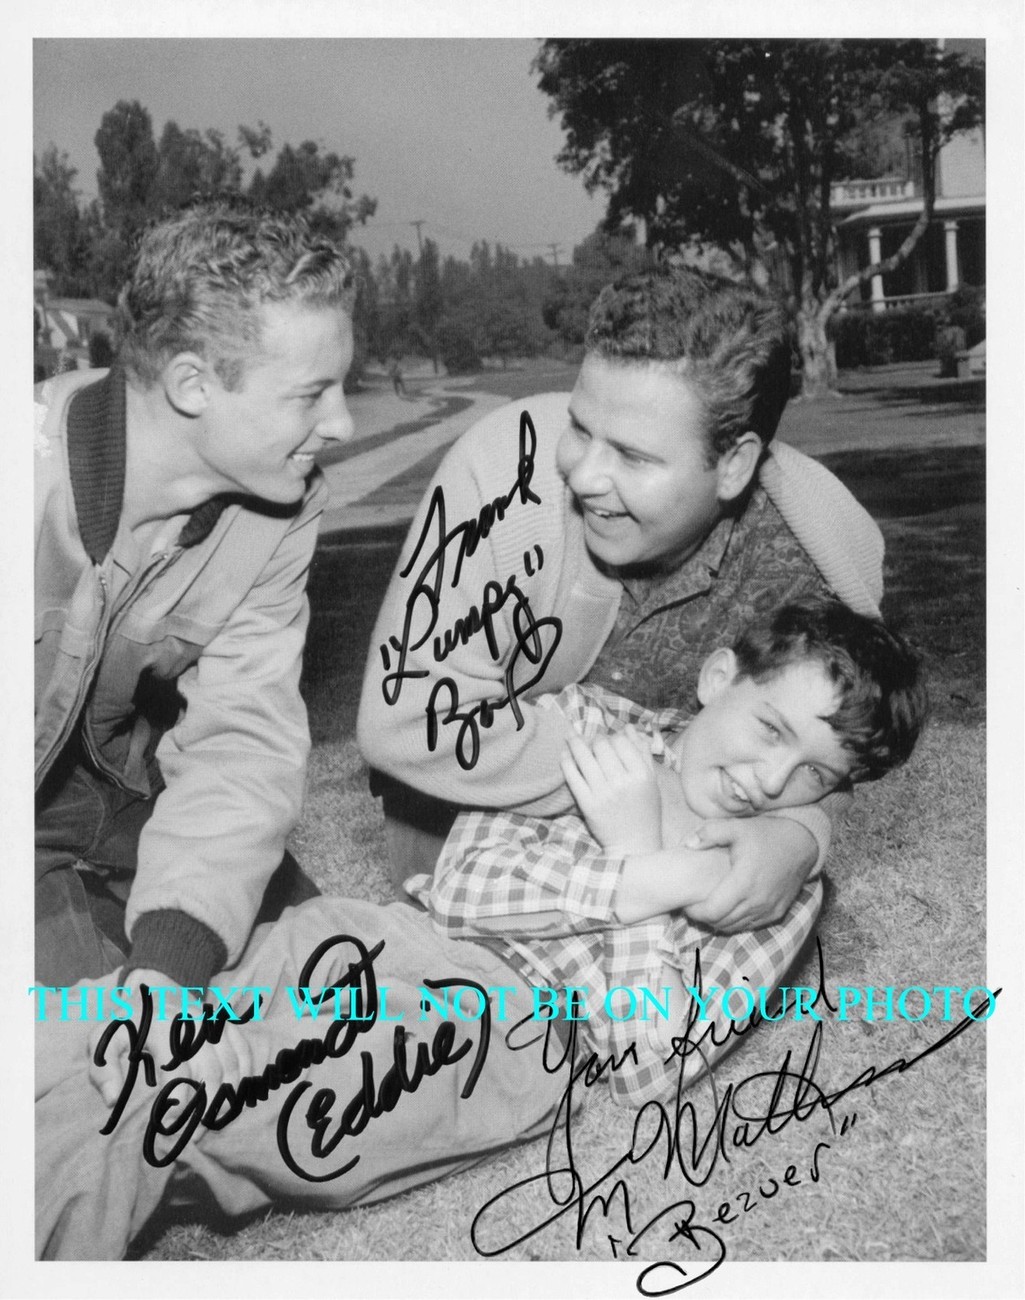 LEAVE IT TO BEAVER CAST SIGNED AUTOGRAPH 8x10 RP PHOTO MATHERS BANK AND OSMOND